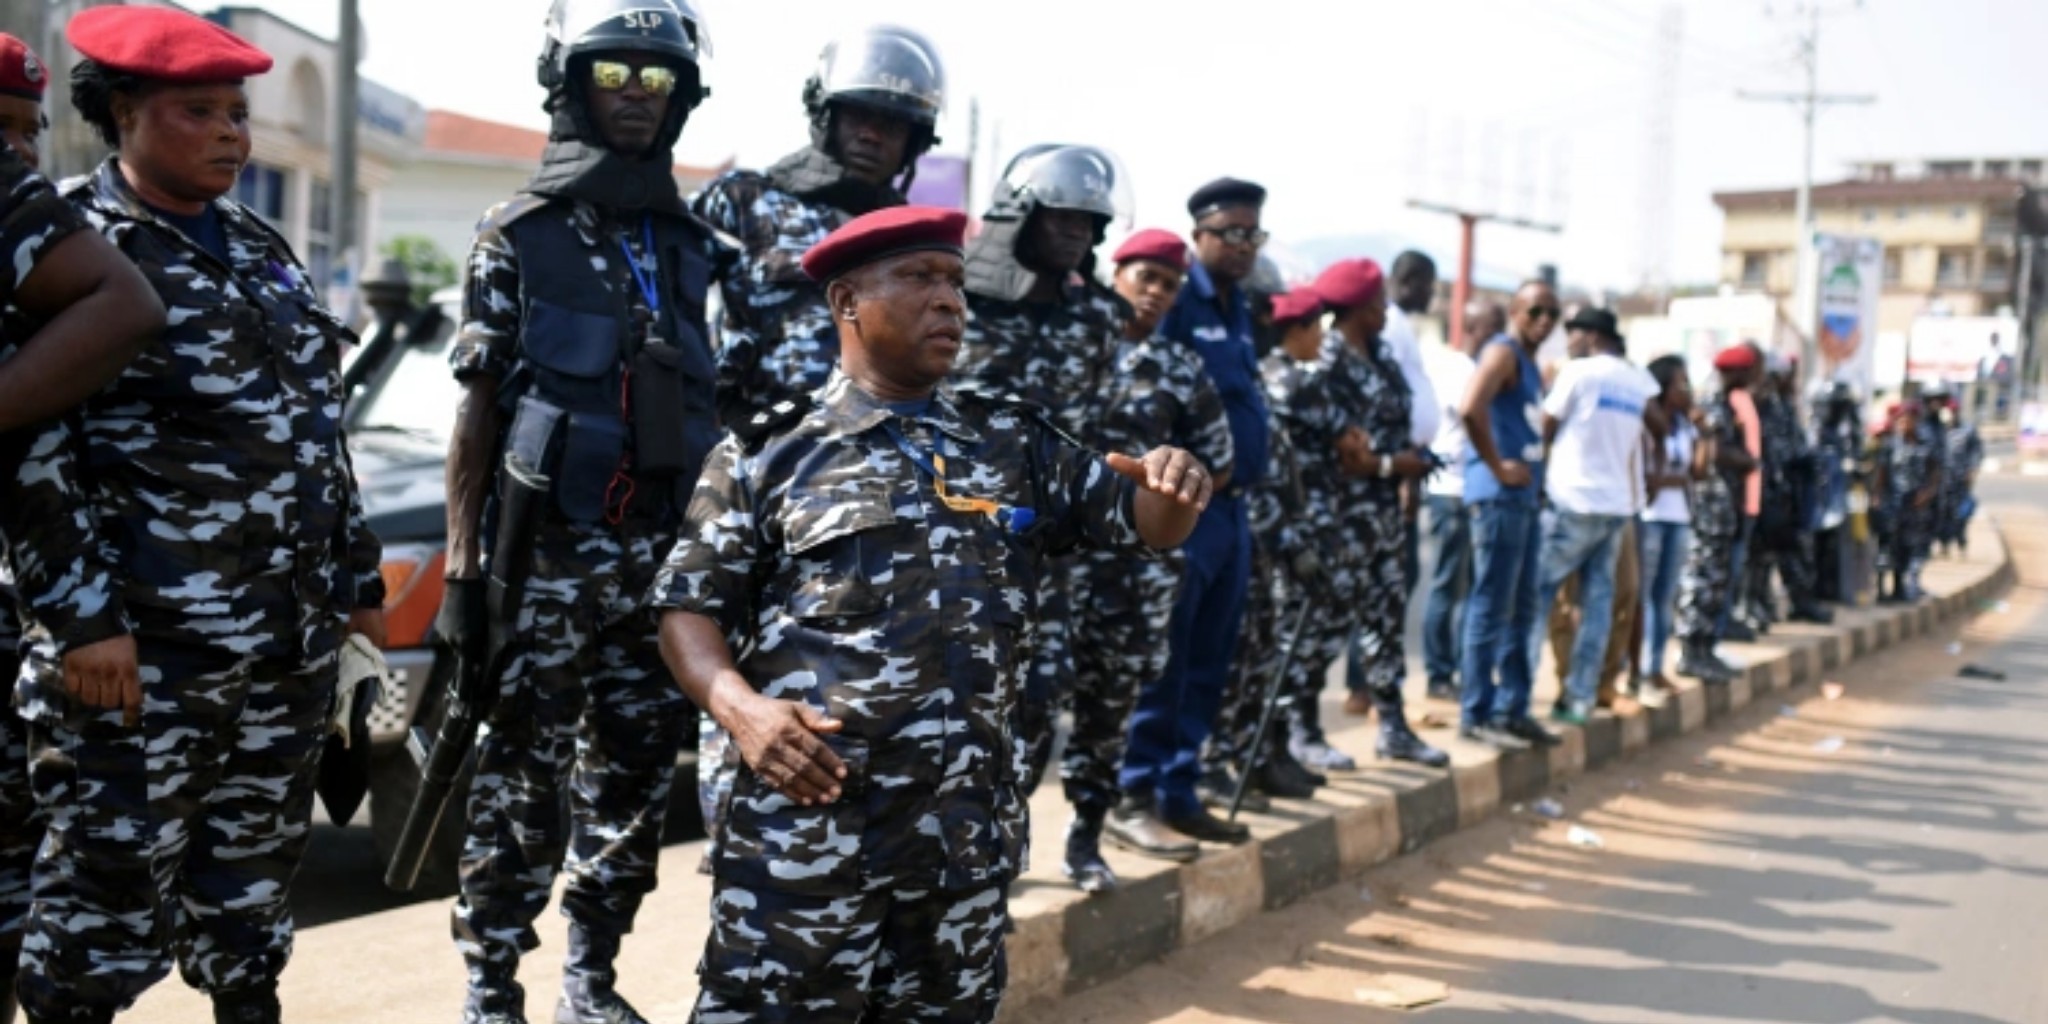 Sierra Leone’s Security Sector Issues Stern Warnings Against Online Tribal and Hate Messages